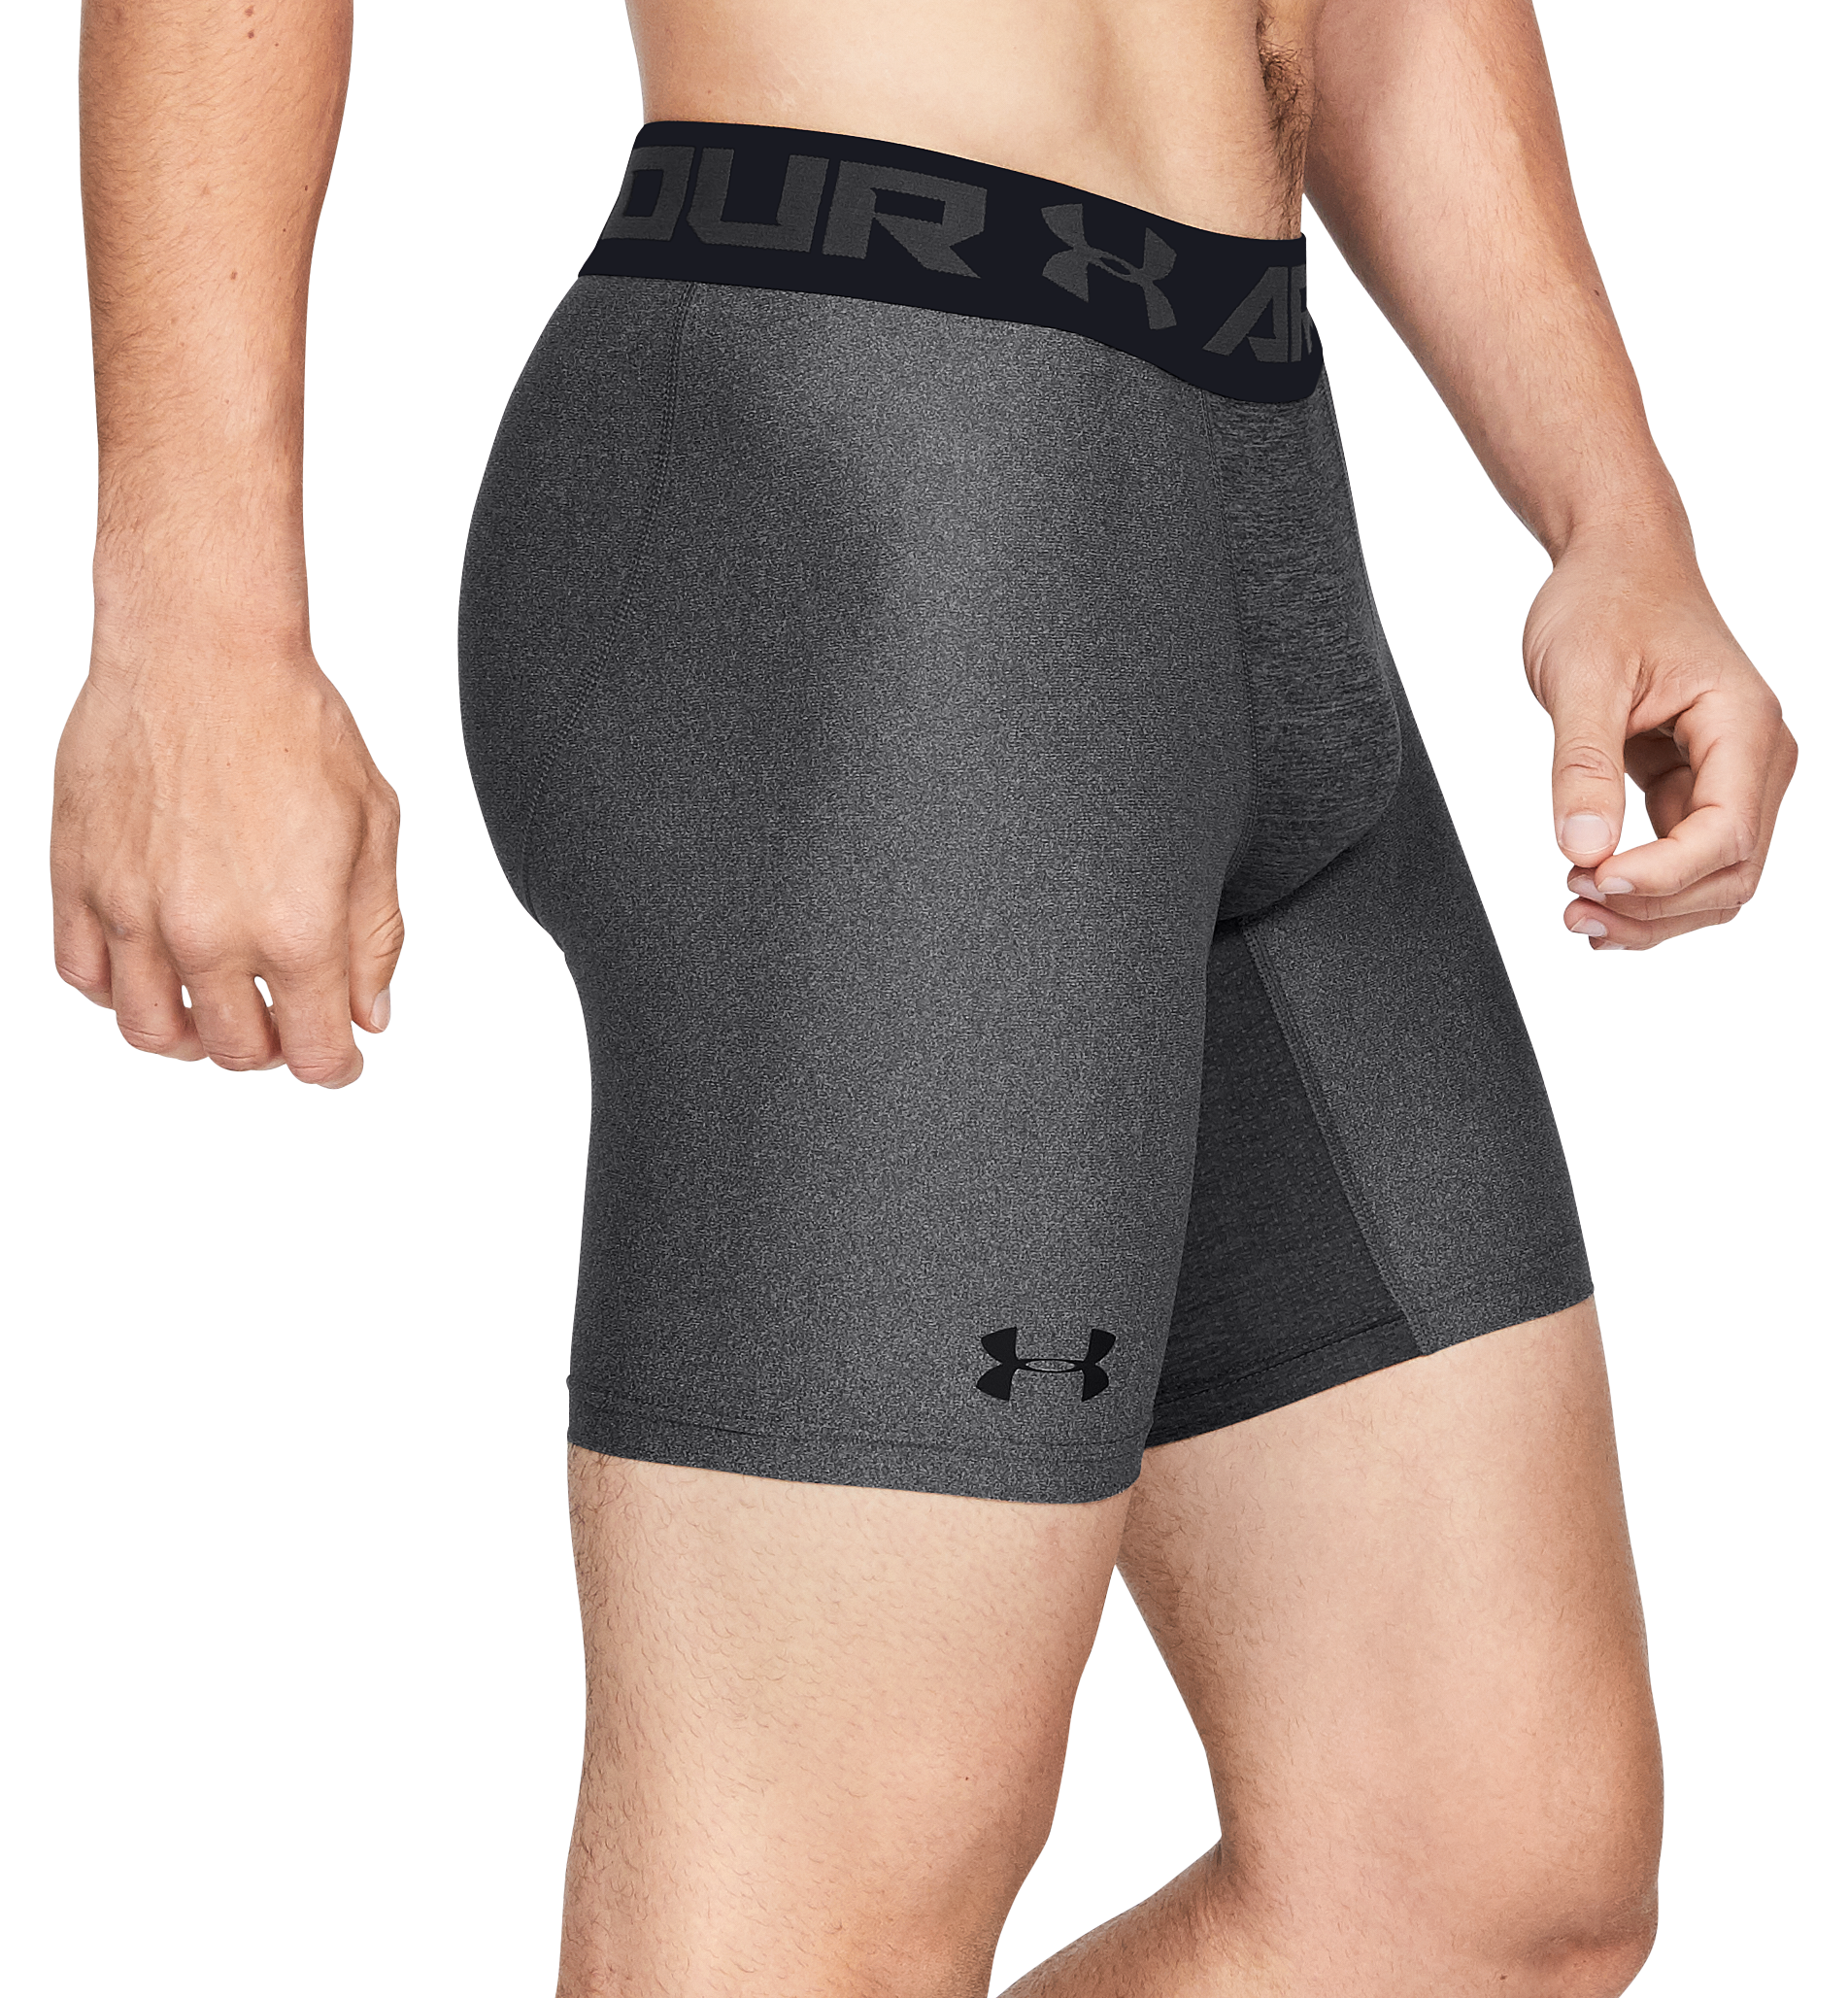 Under Armour Heat Gear 2.0 Compression Short White 1289568-100 - Free  Shipping at LASC